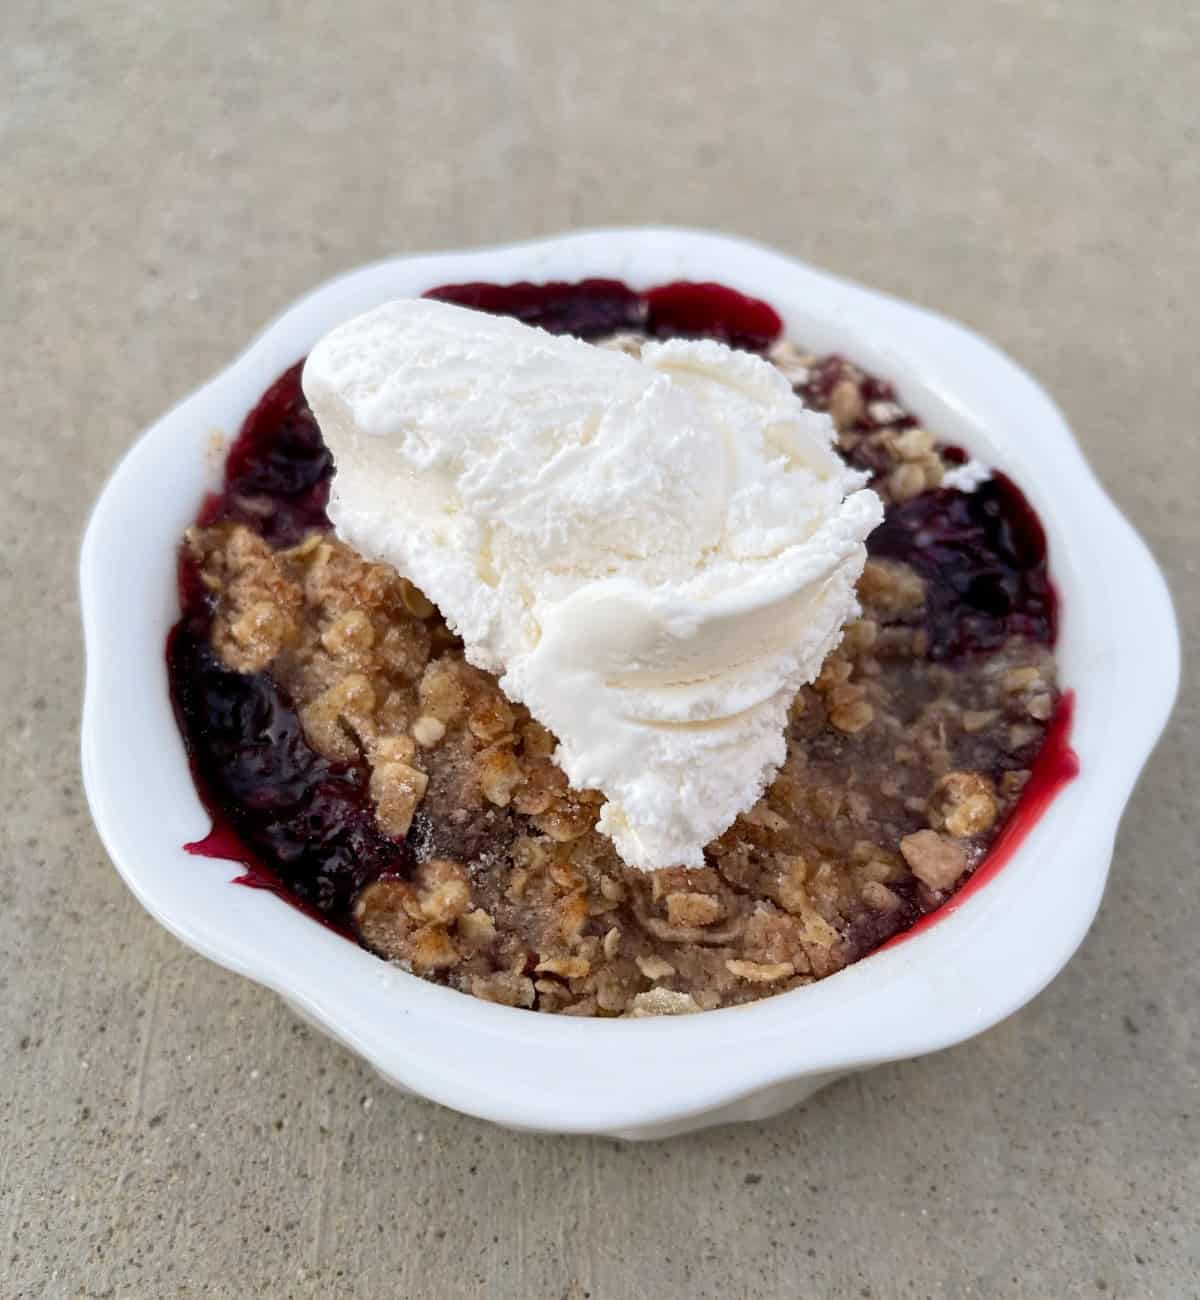 Cherry berry crumble crunch dessert topped with light whipped topping.